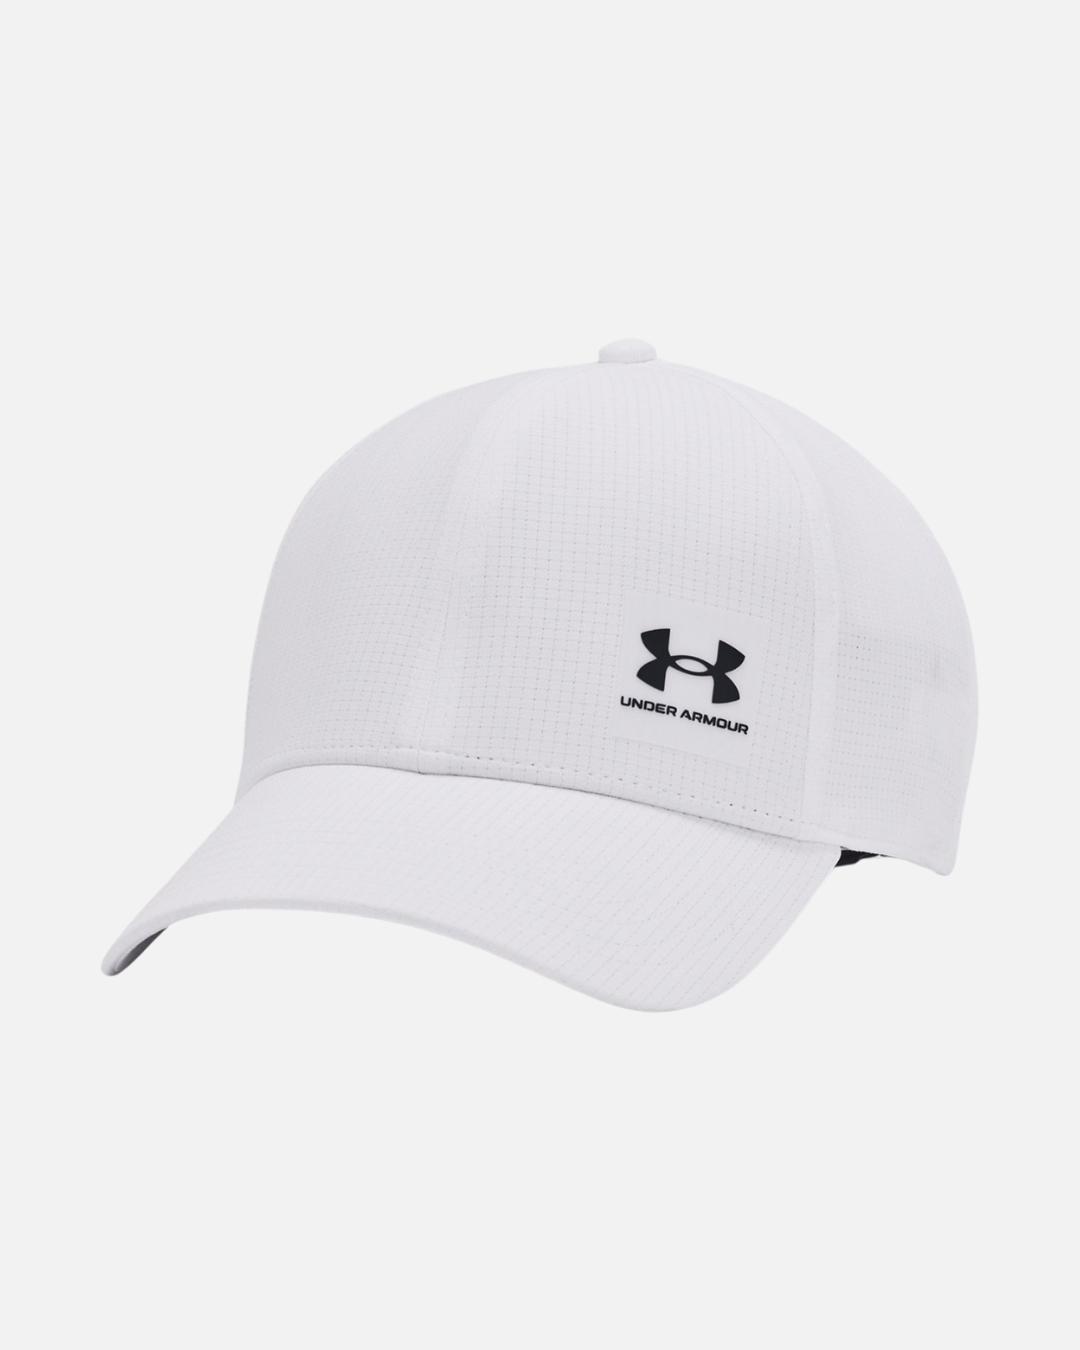 Under Armour Iso-Chill Armourvent Kappe – Weiß